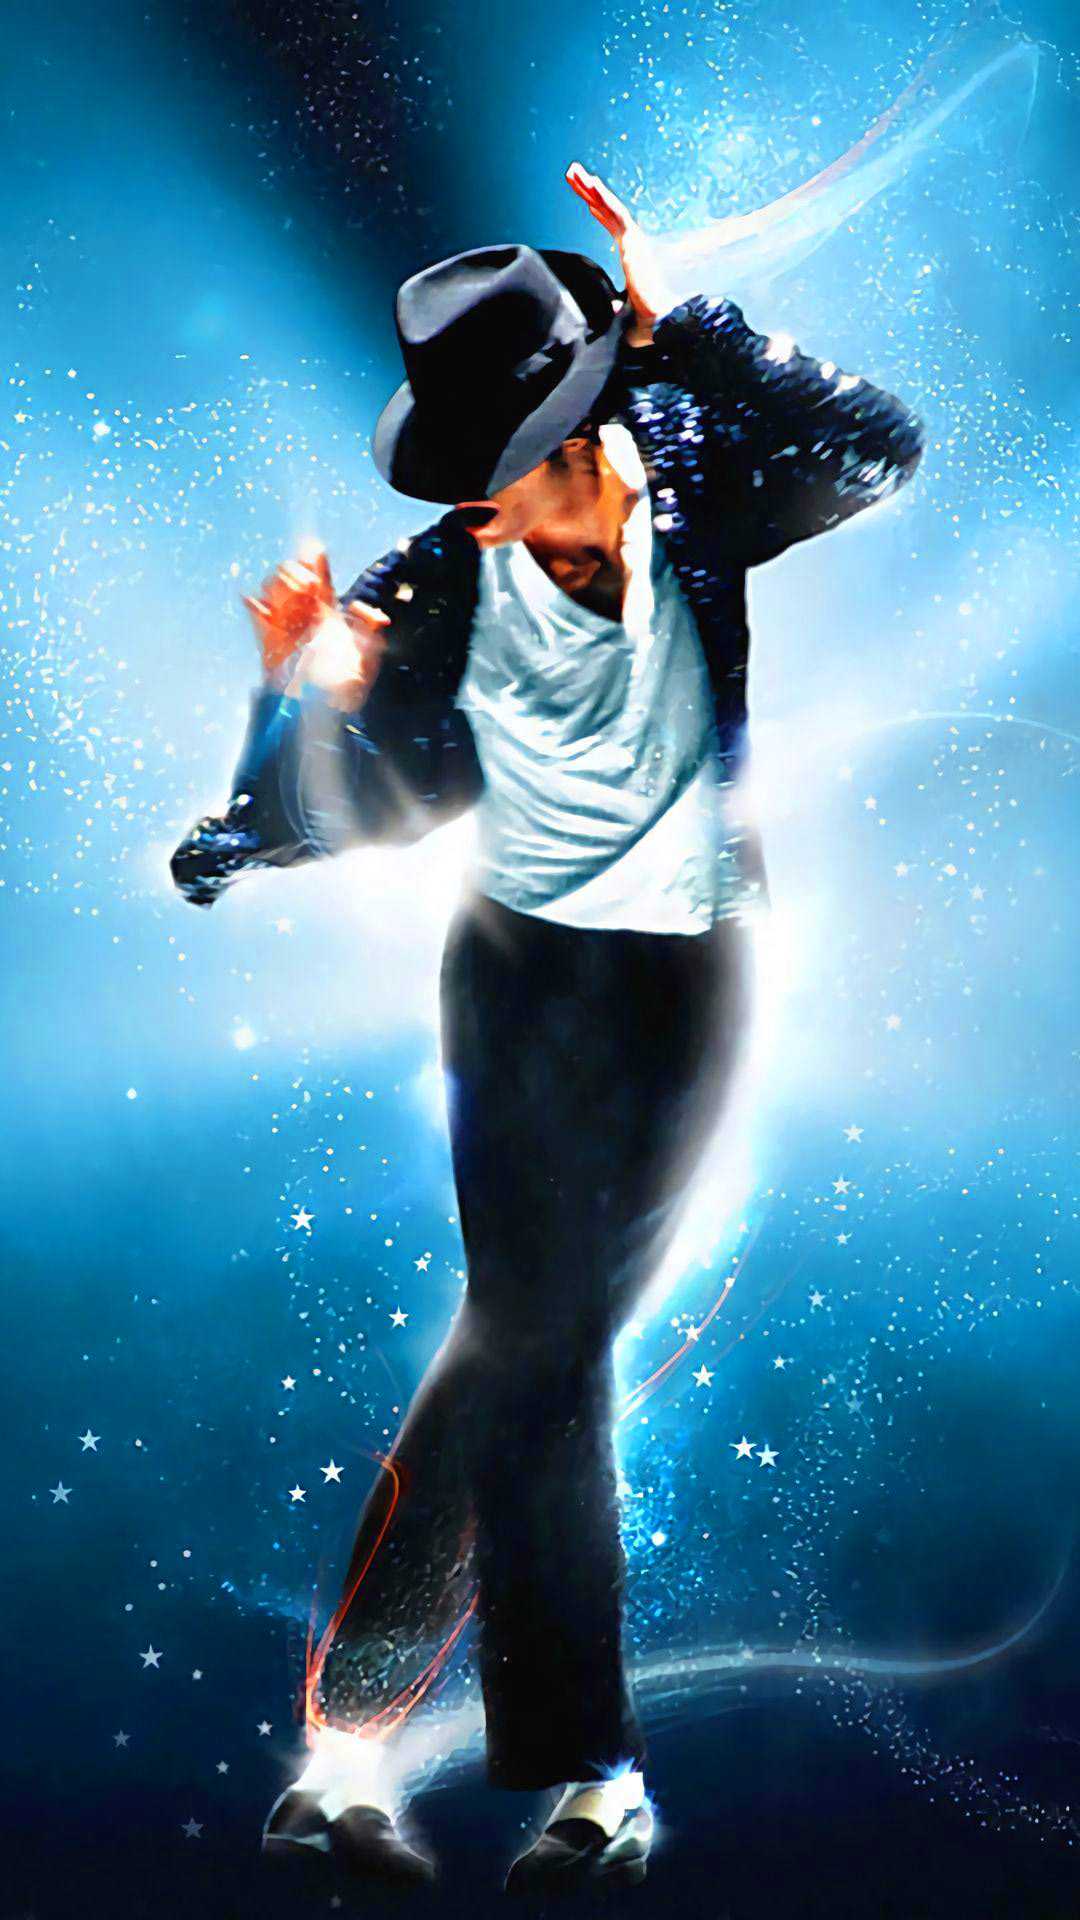 Smooth Criminal' - Michael Jackson birth anniversary: Five iconic hits from  the King of Pop | The Economic Times